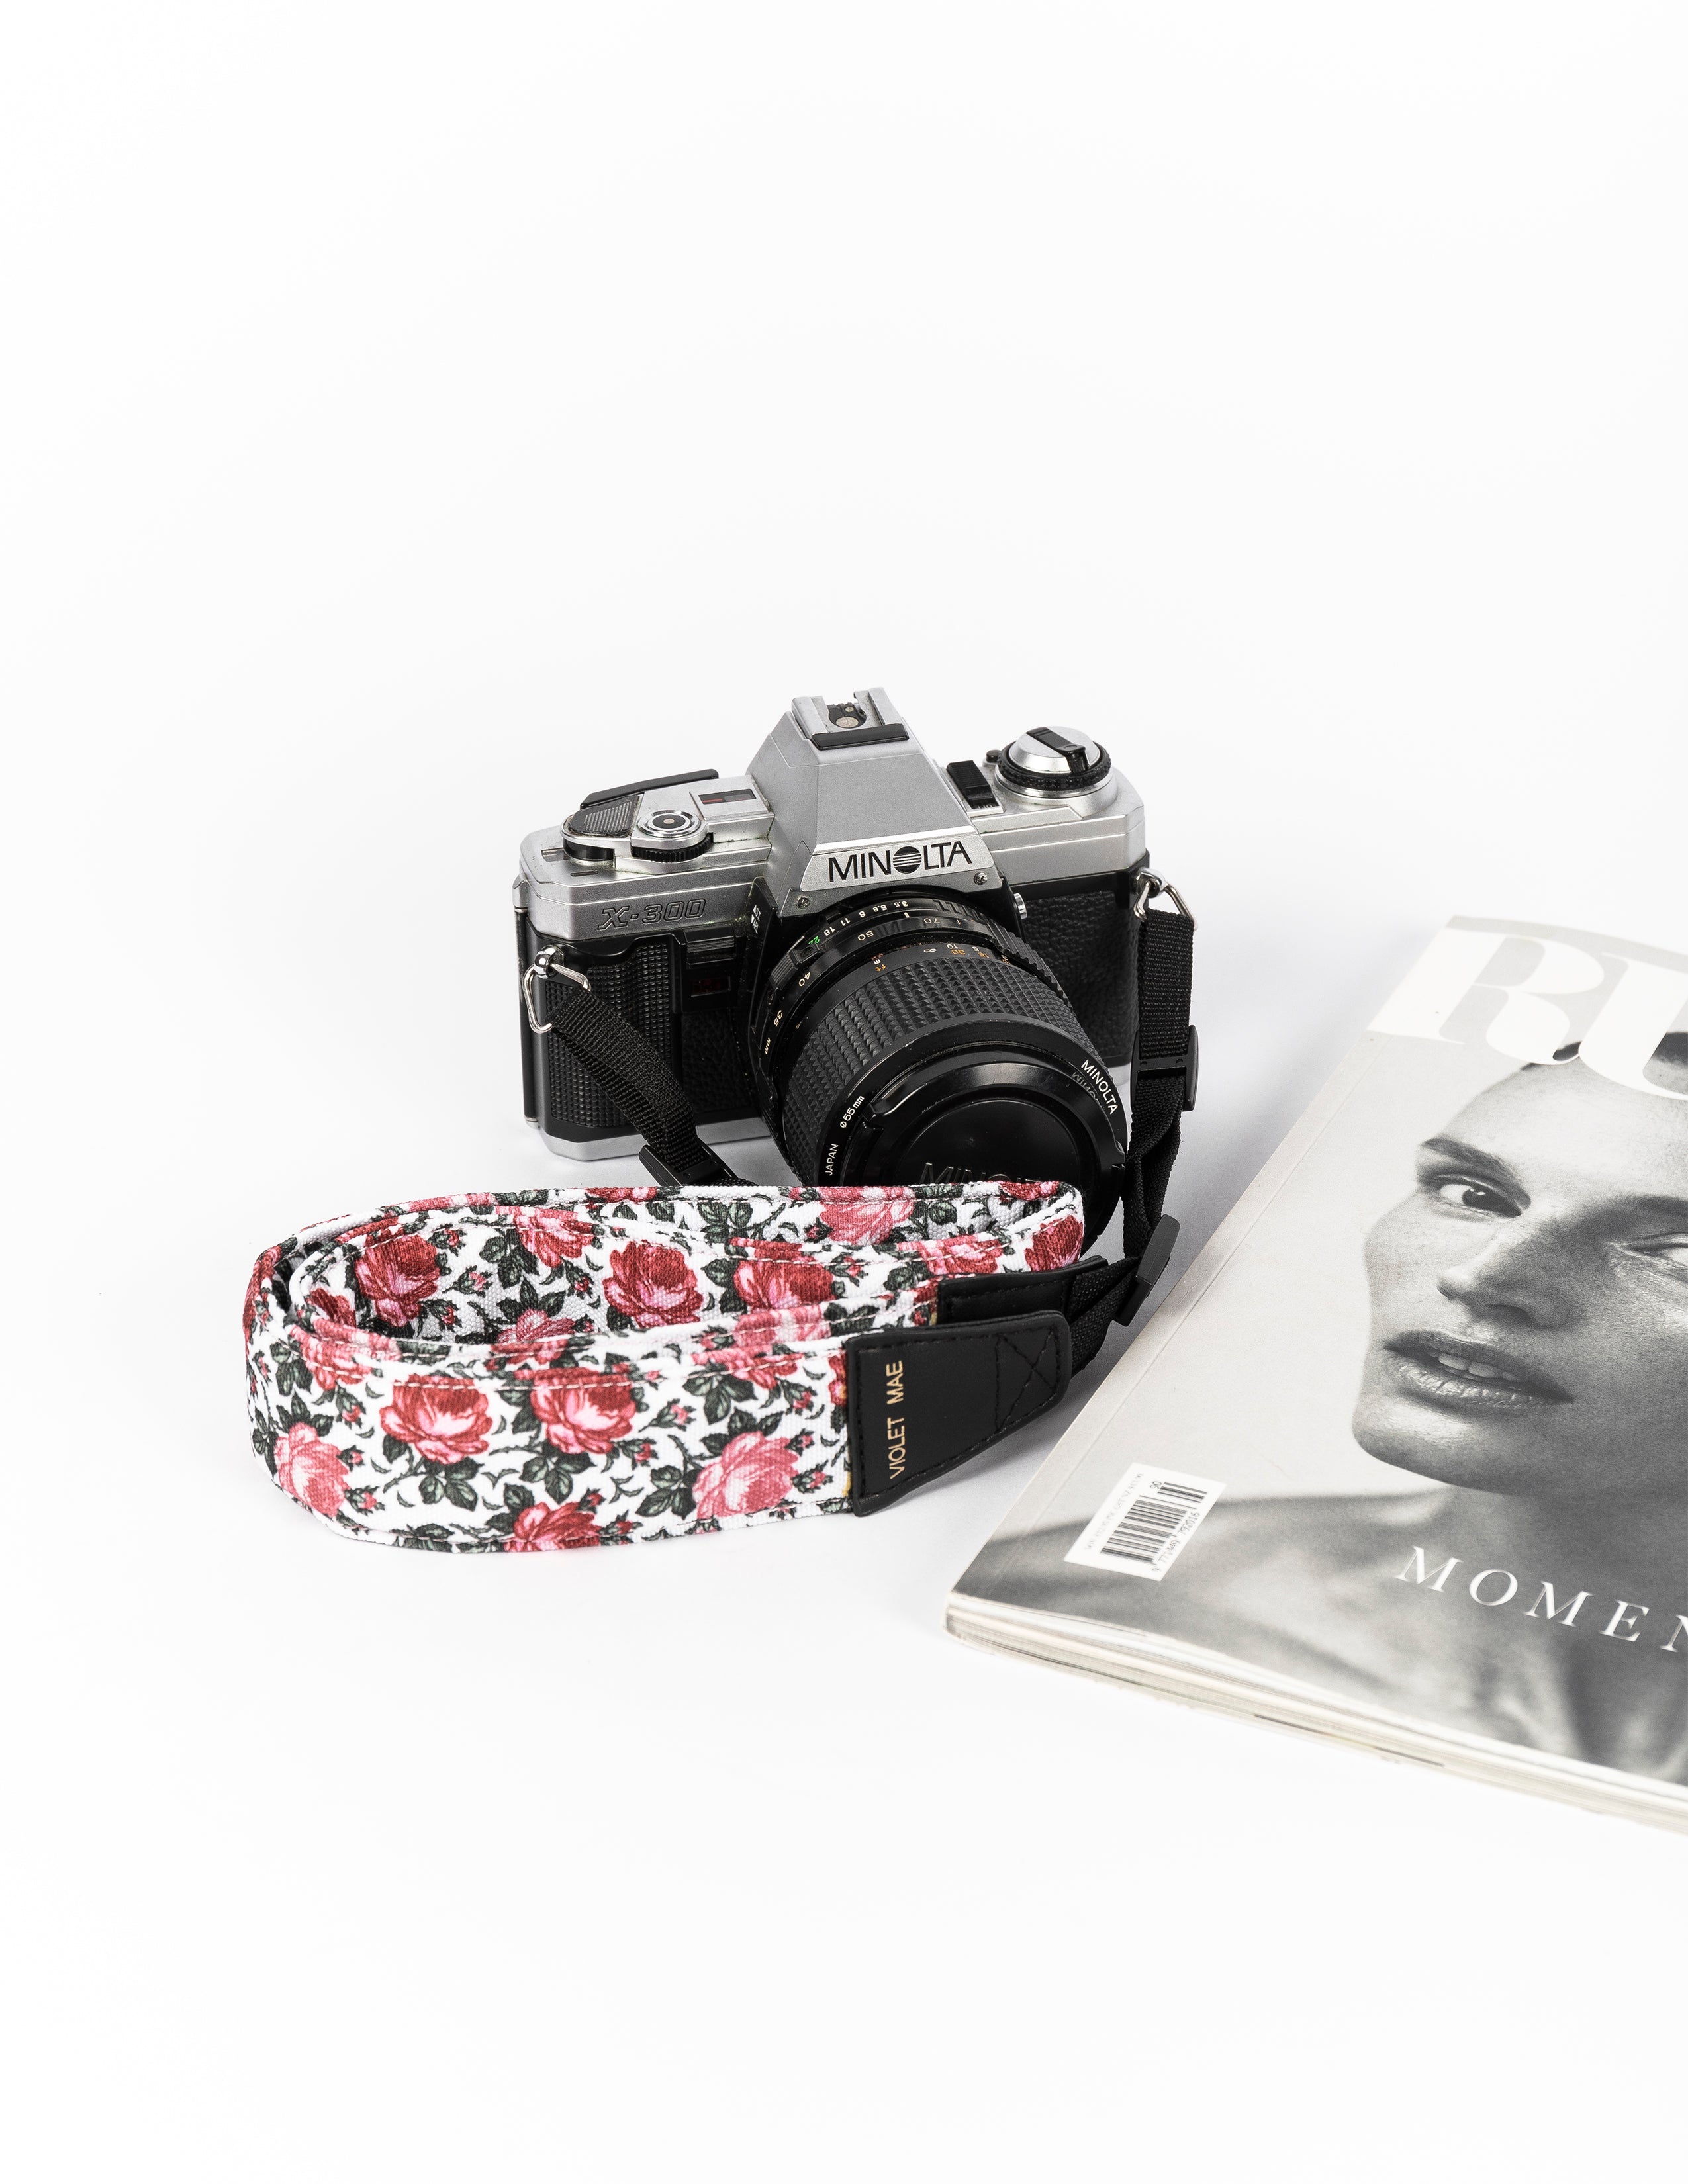 chic camera strap rose print pink and white